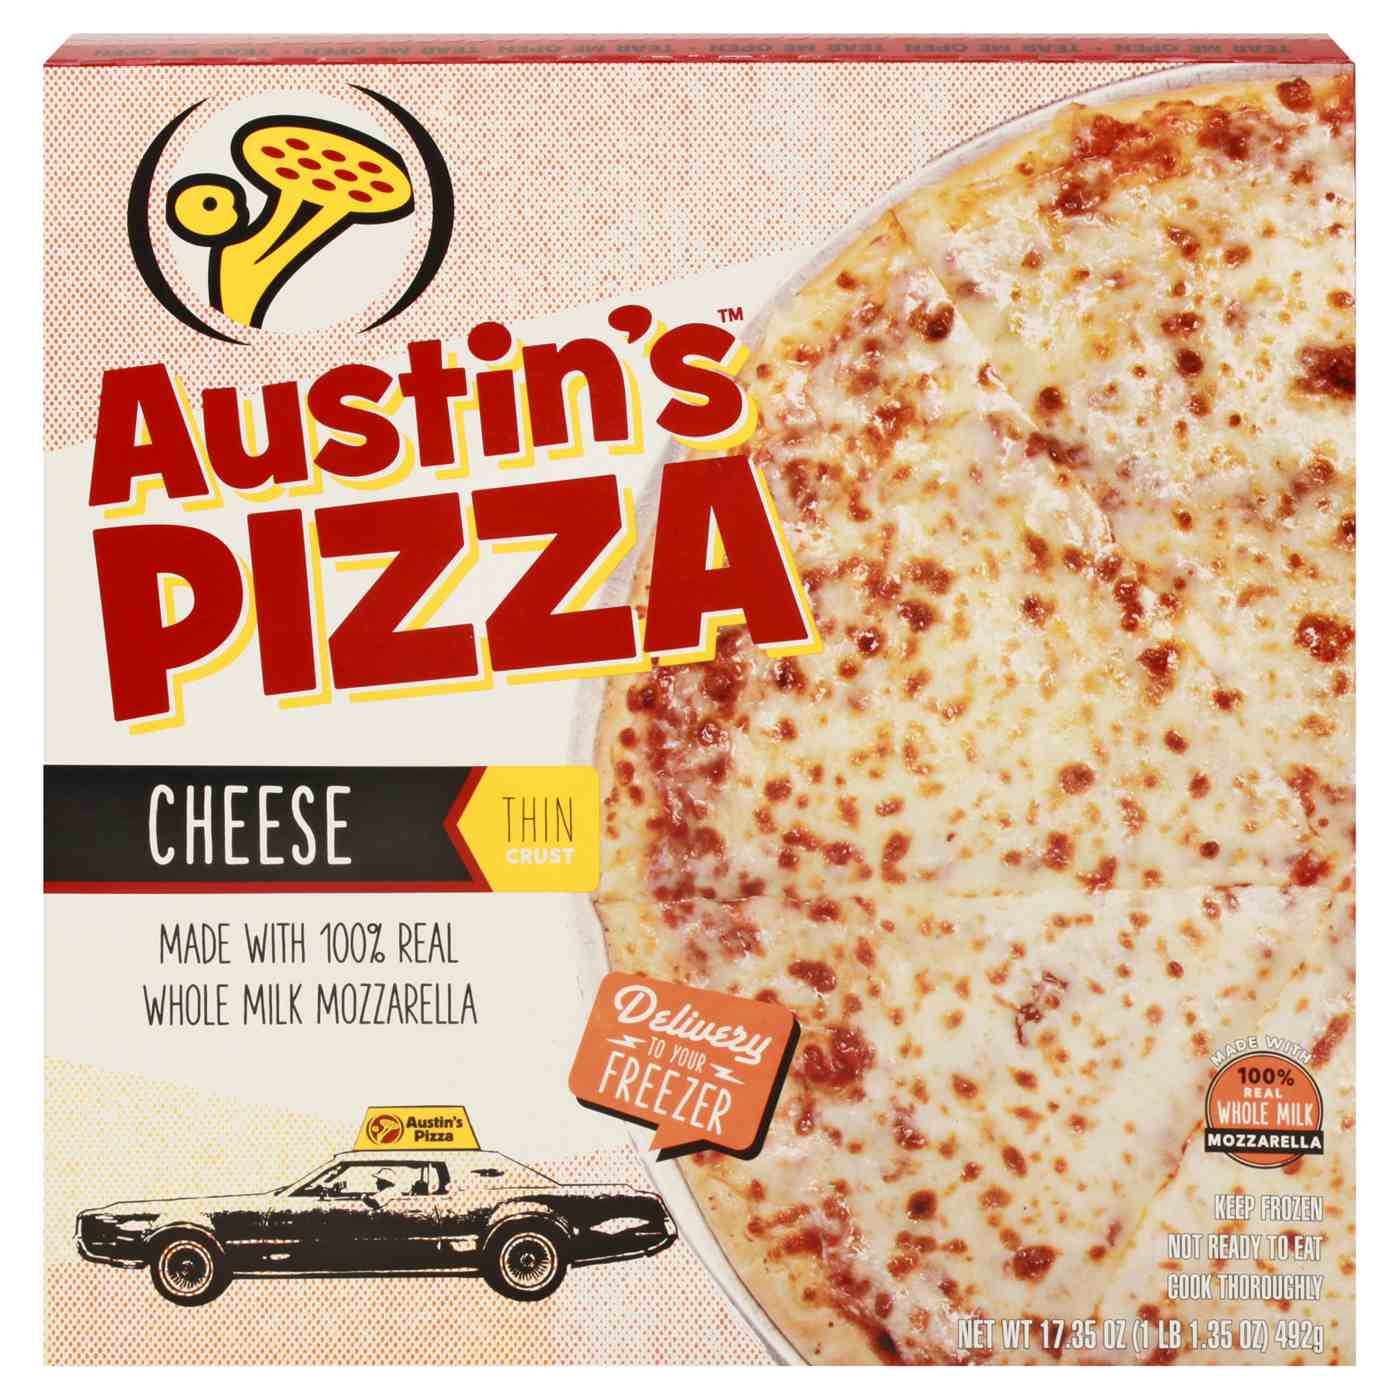 Austin's Pizza Thin Crust Frozen Pizza - Cheese; image 1 of 2